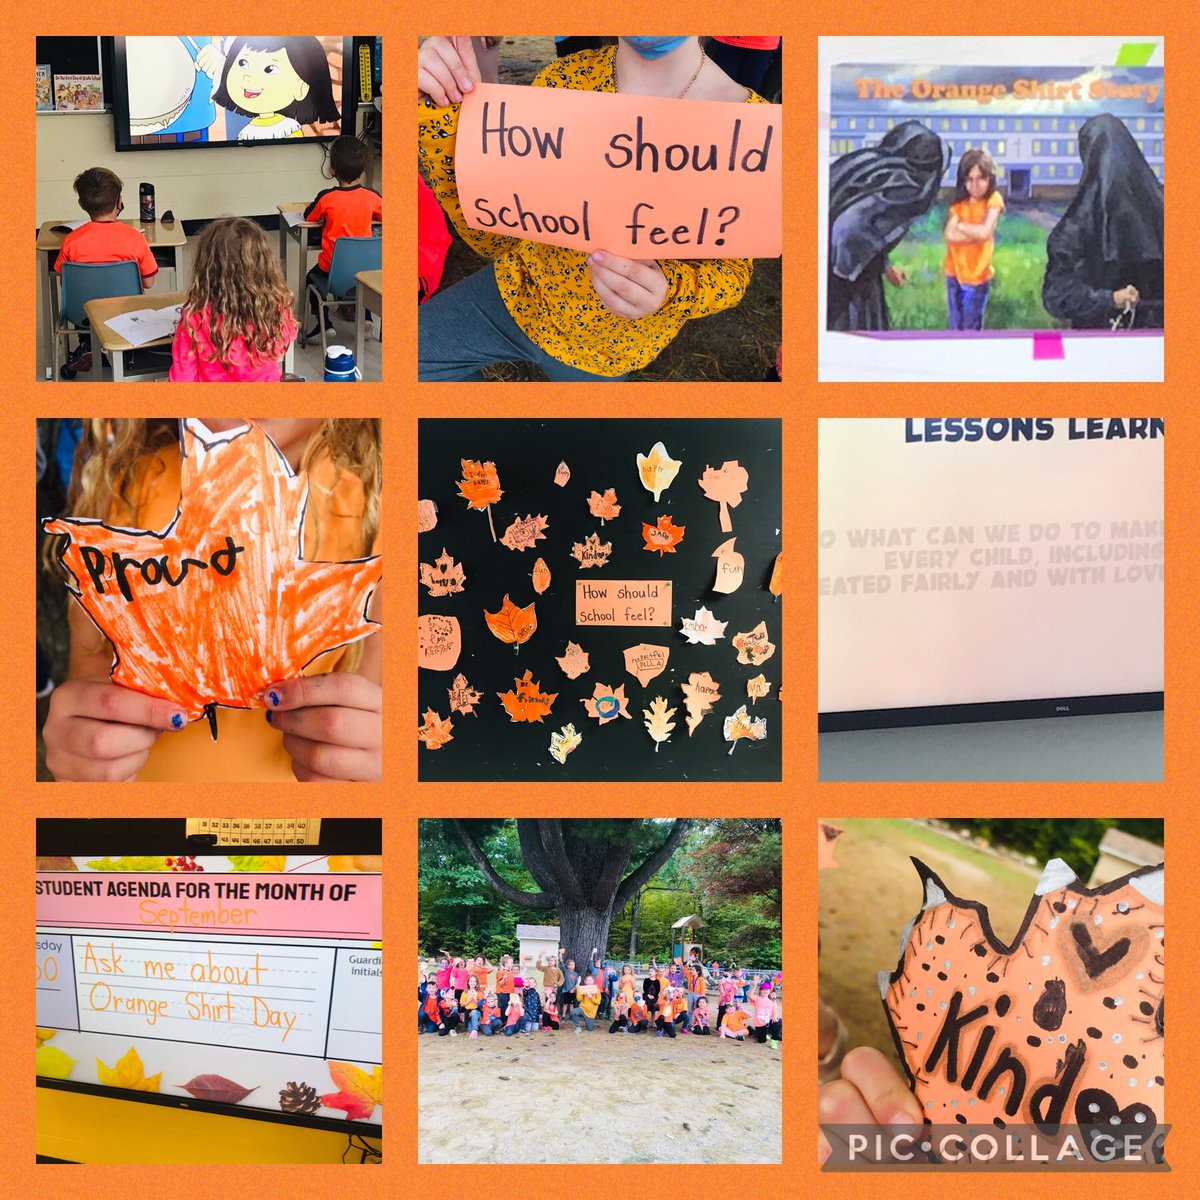 Today @MacaulayPS students asked questions, they listened deeply, they spoke from their hearts and they shared their hopes for the future. @TLDSB @eco_holly #OrangeShirtDay2021 #TLDSBFNIM #TLDSBLEARNS @tletl_etfo